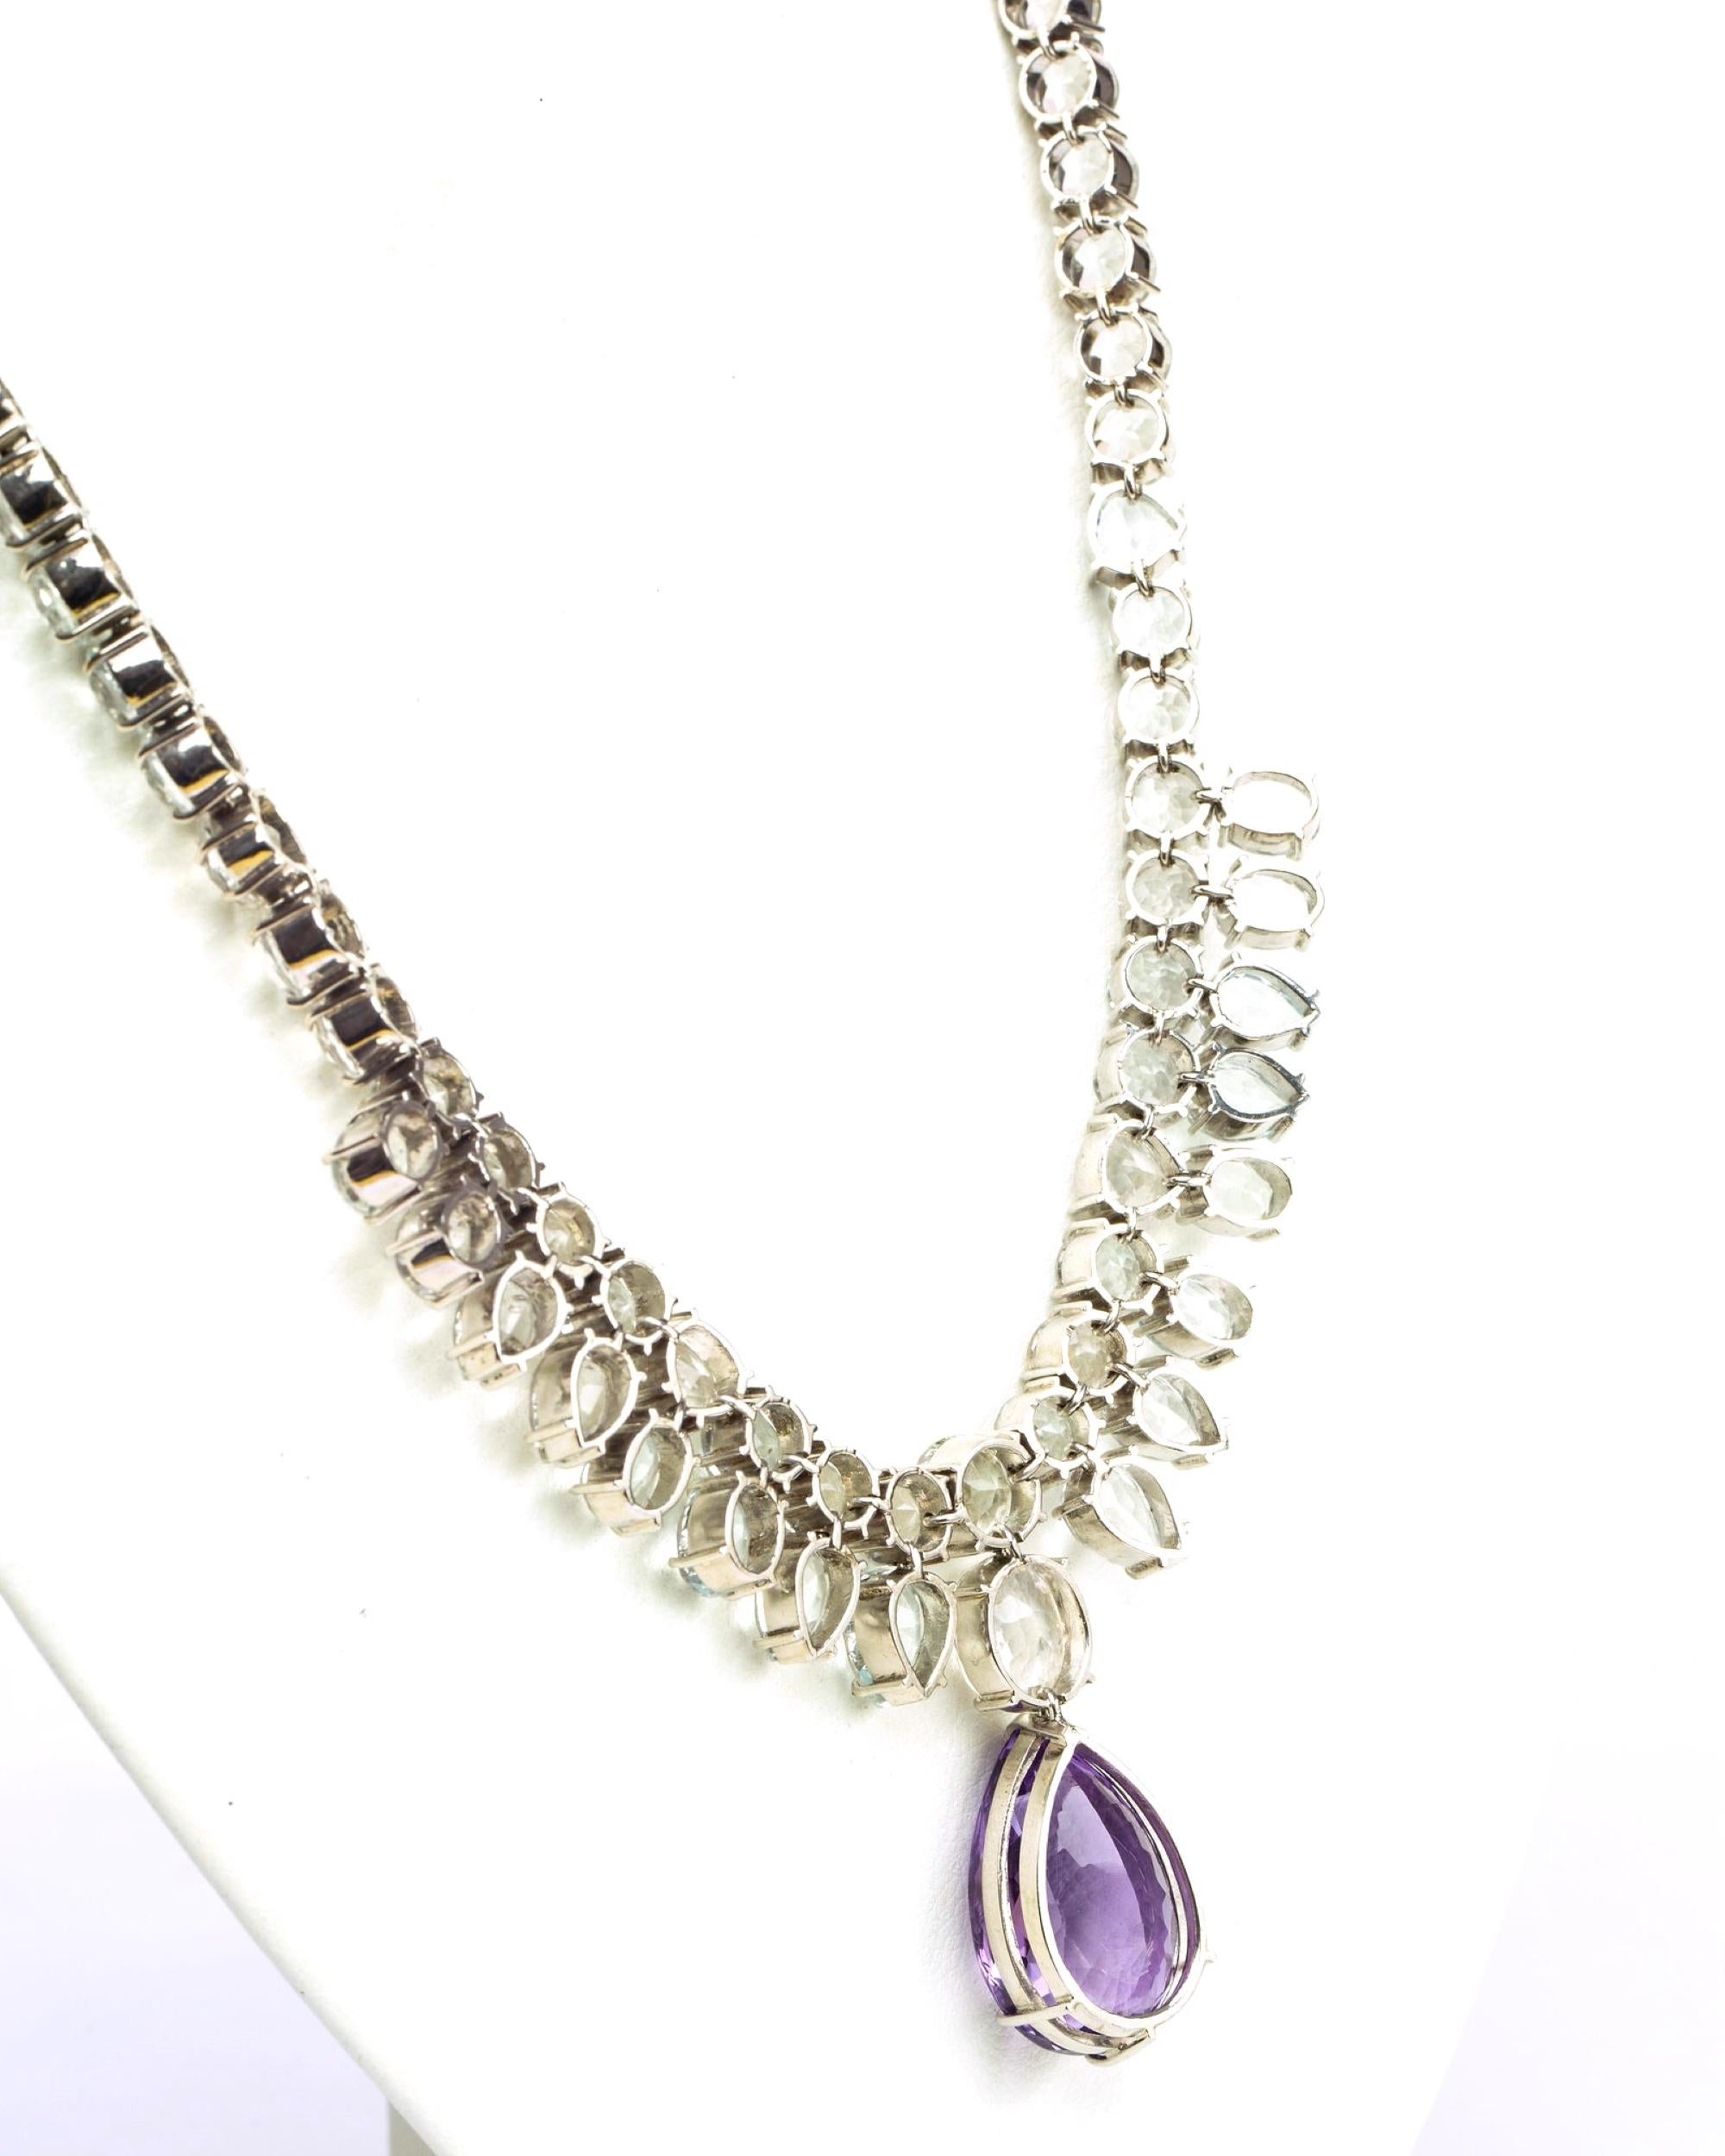 10ct Pear Cut Amethyst and Topaz Necklace For Sale 2